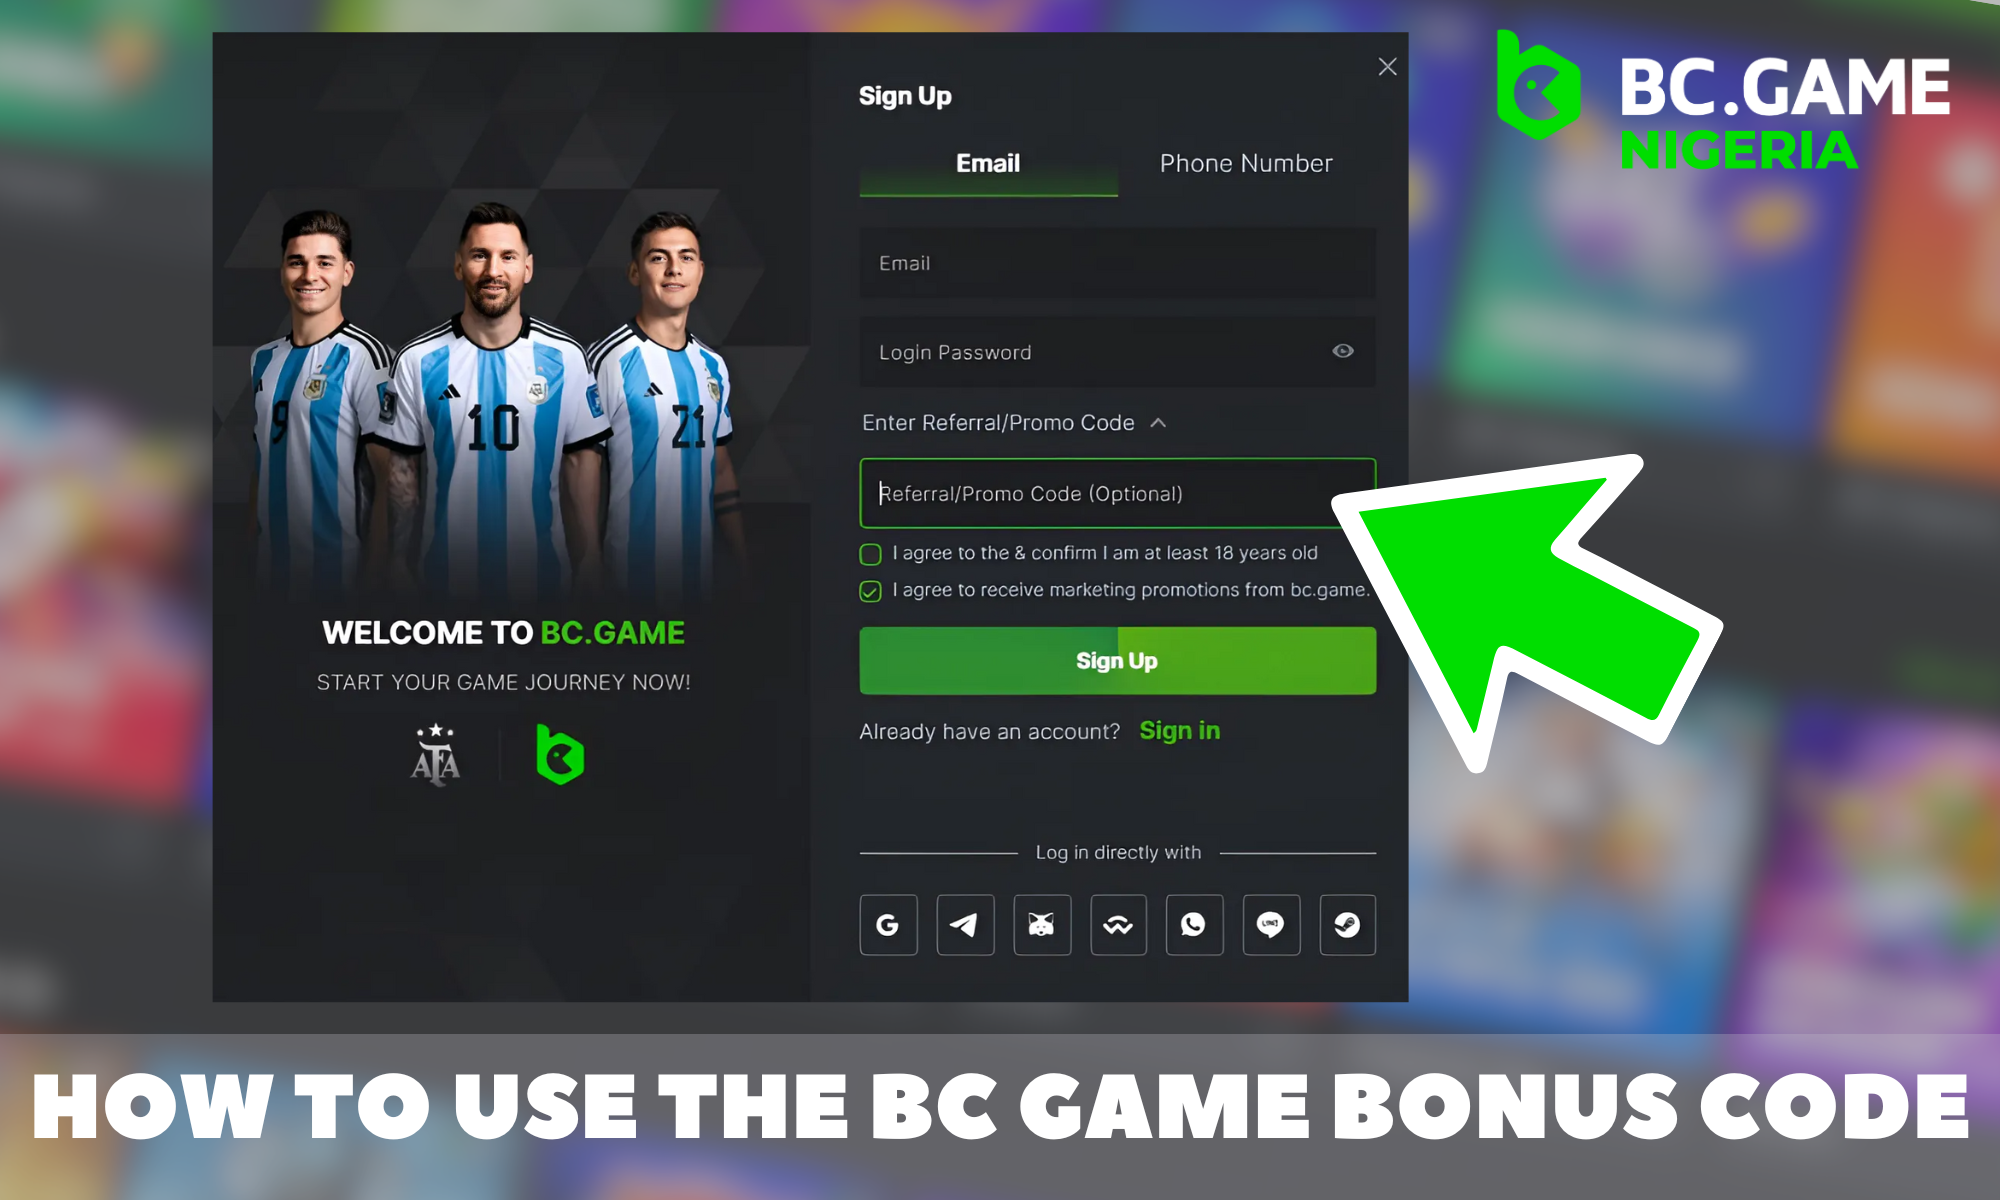 Step-by-step instructions on how to use the BC Game Bonus Code